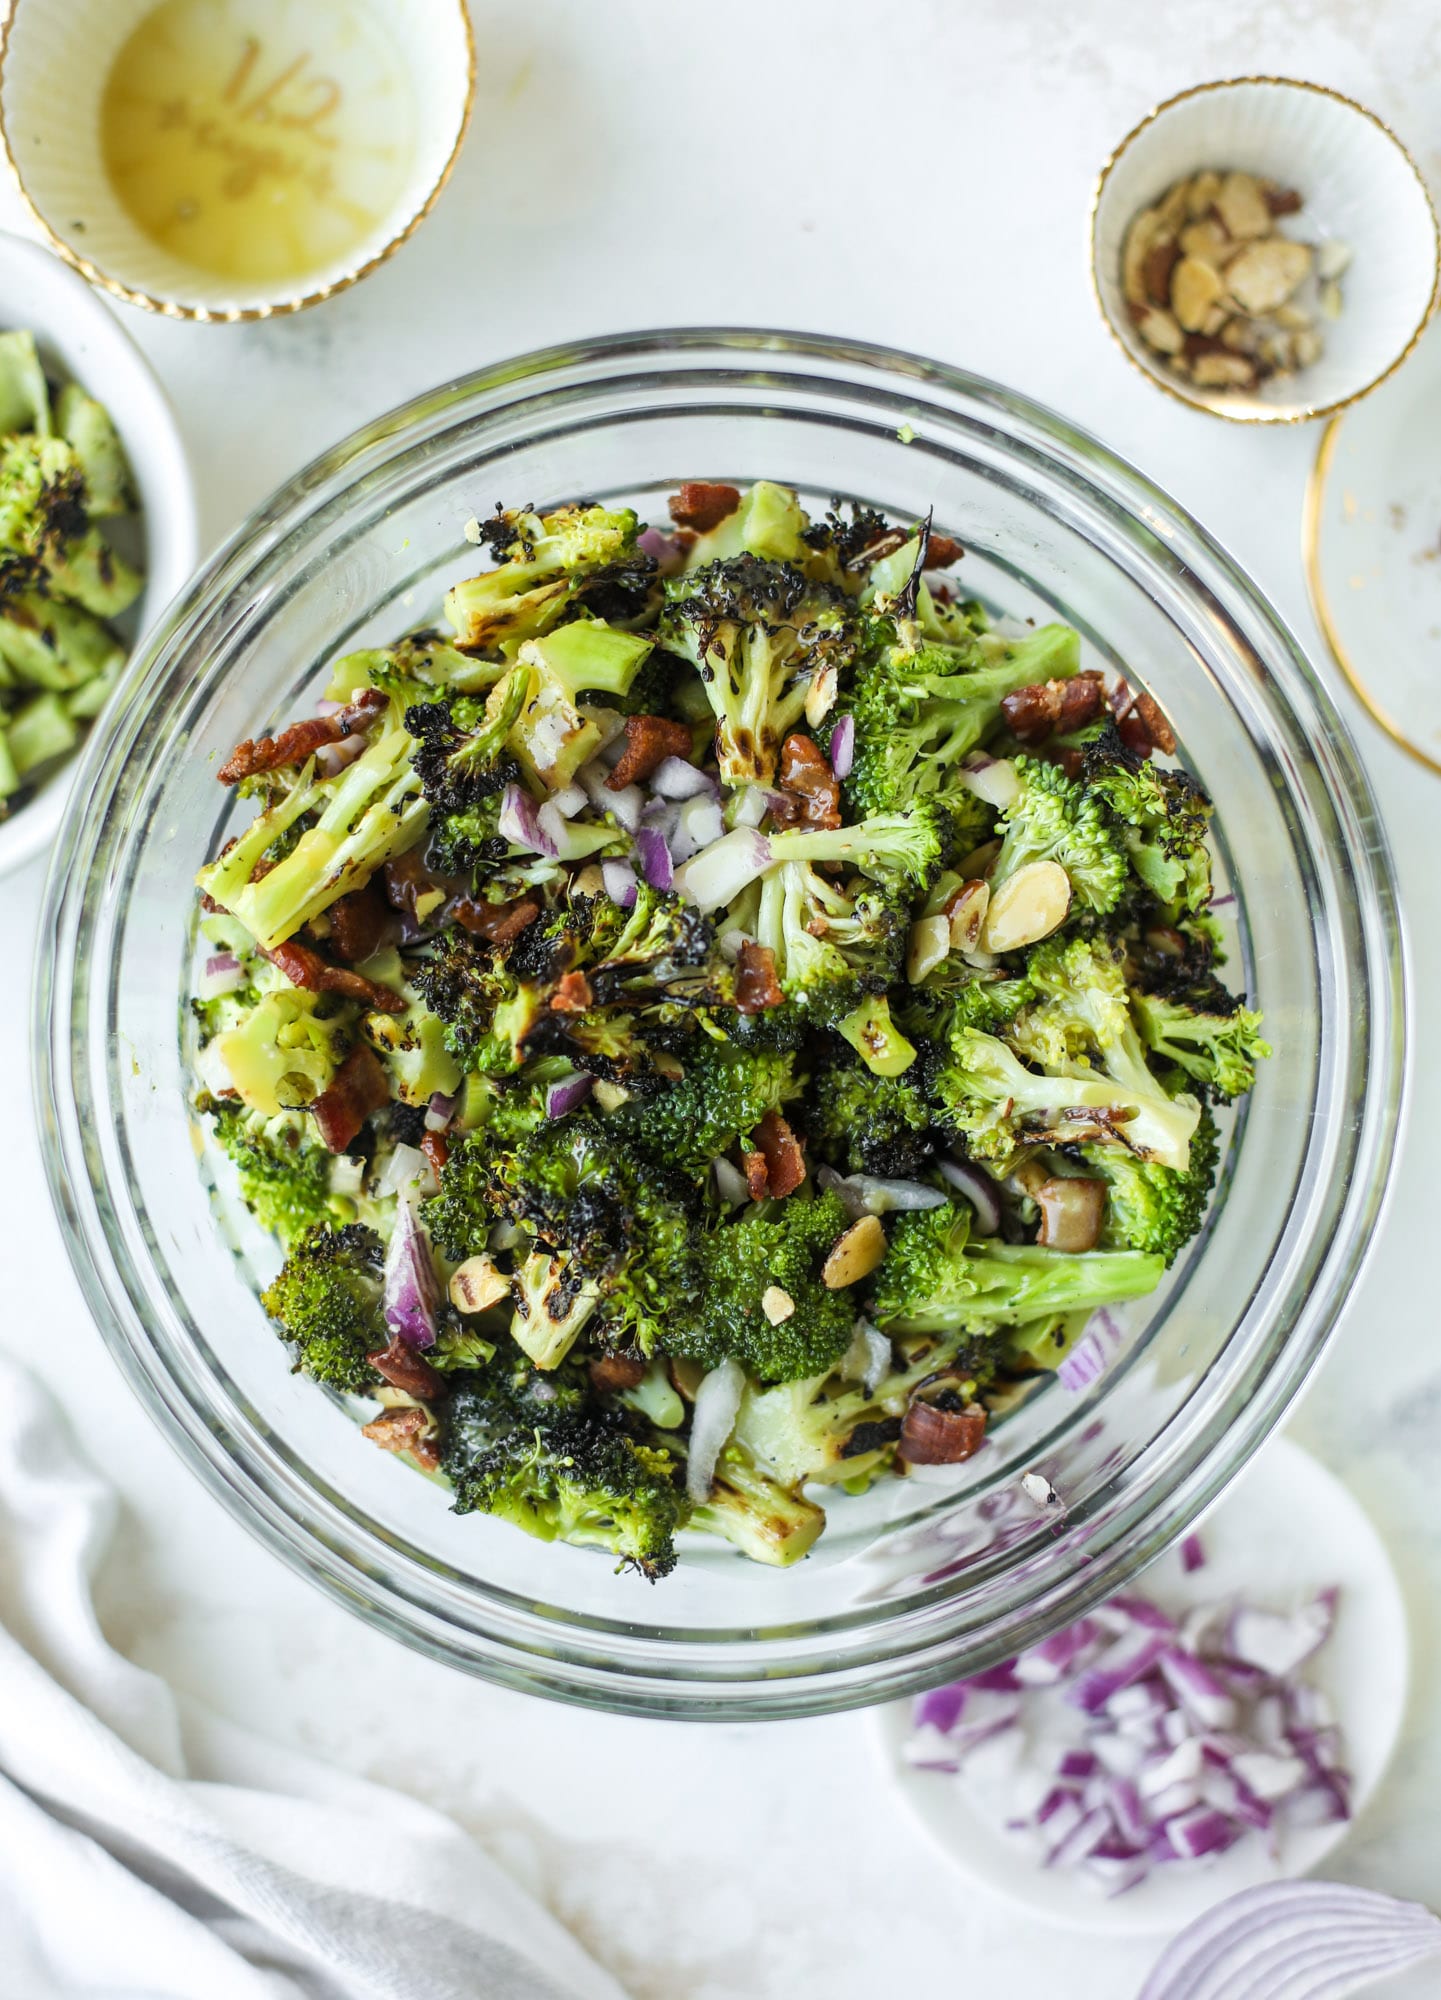 My favorite broccoli salad is here! This broccoli crunch salad is full of grilled broccoli, sliced almonds, diced scallions and crunchy bacon. It's so good!